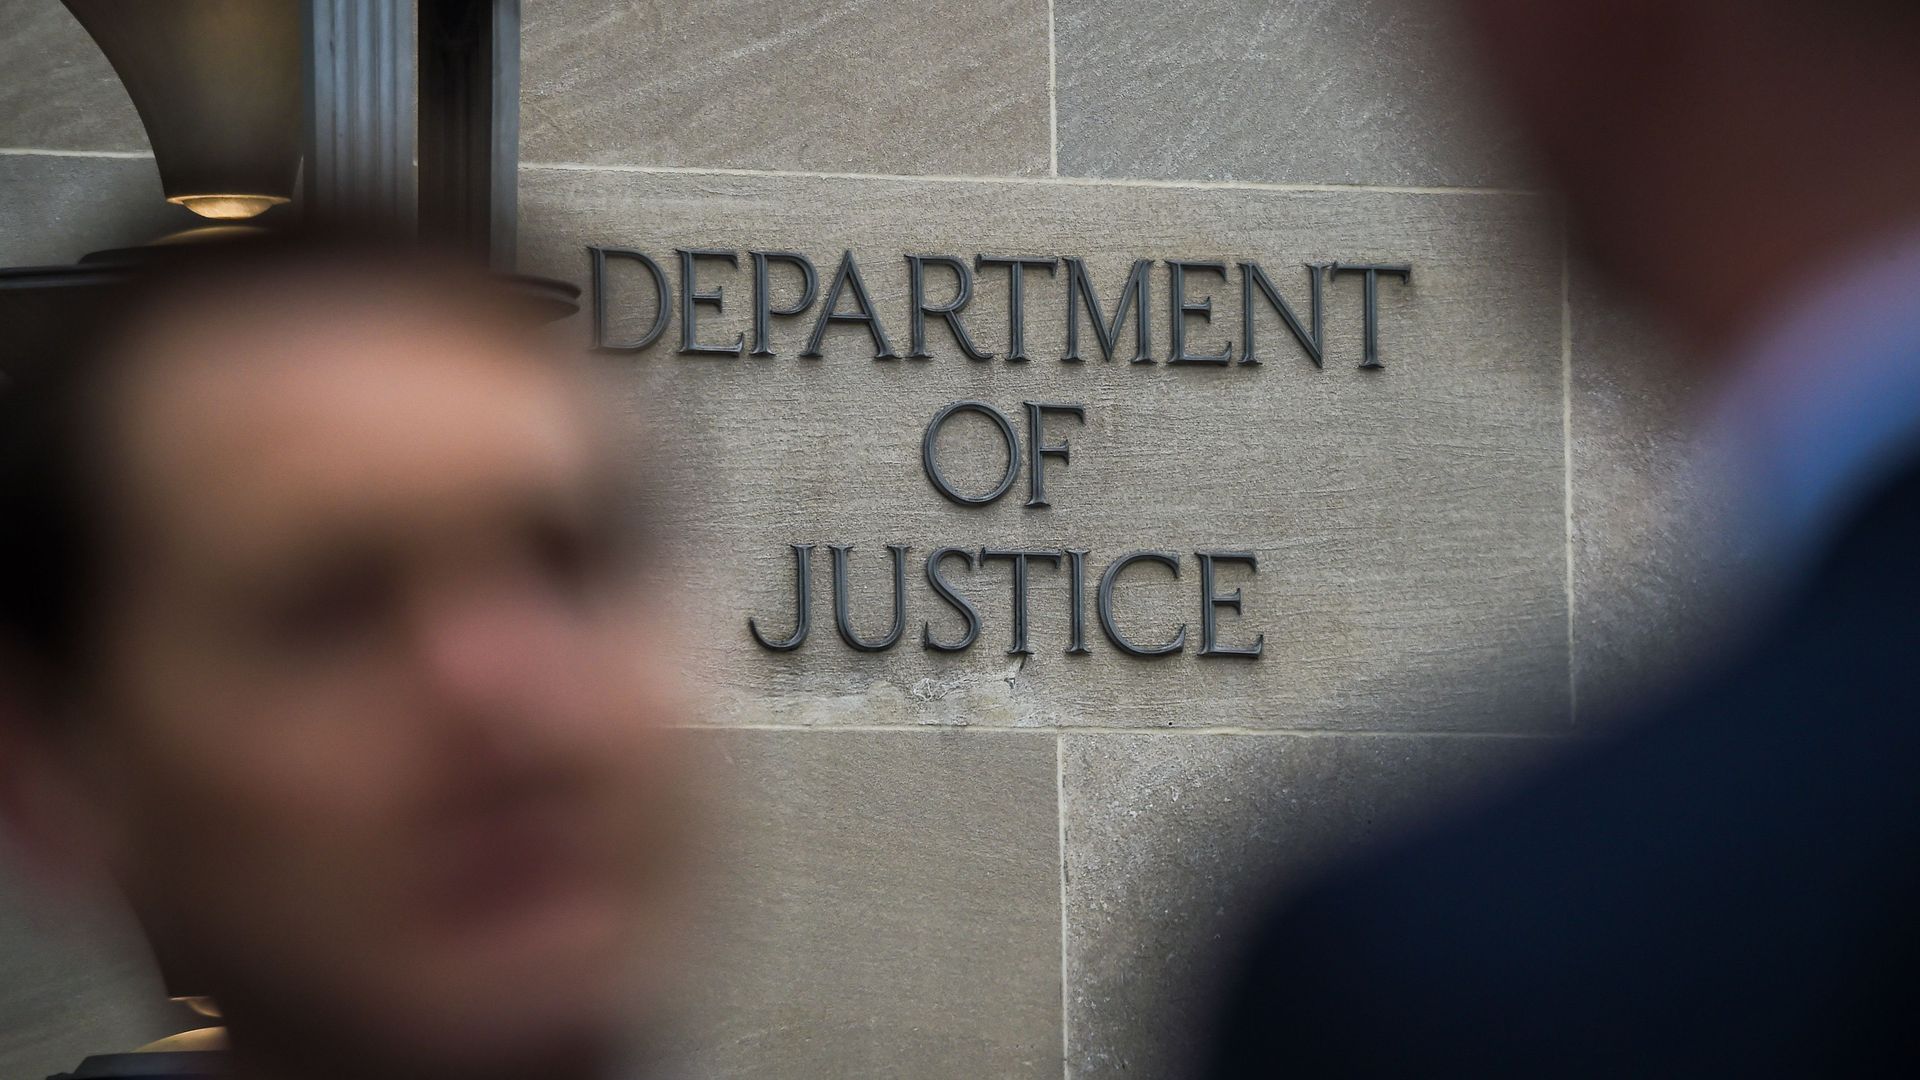 A "Department of Justice" sign is seen on the wall of the US Department of Justice building in Washington, DC on April 18, 2019. 